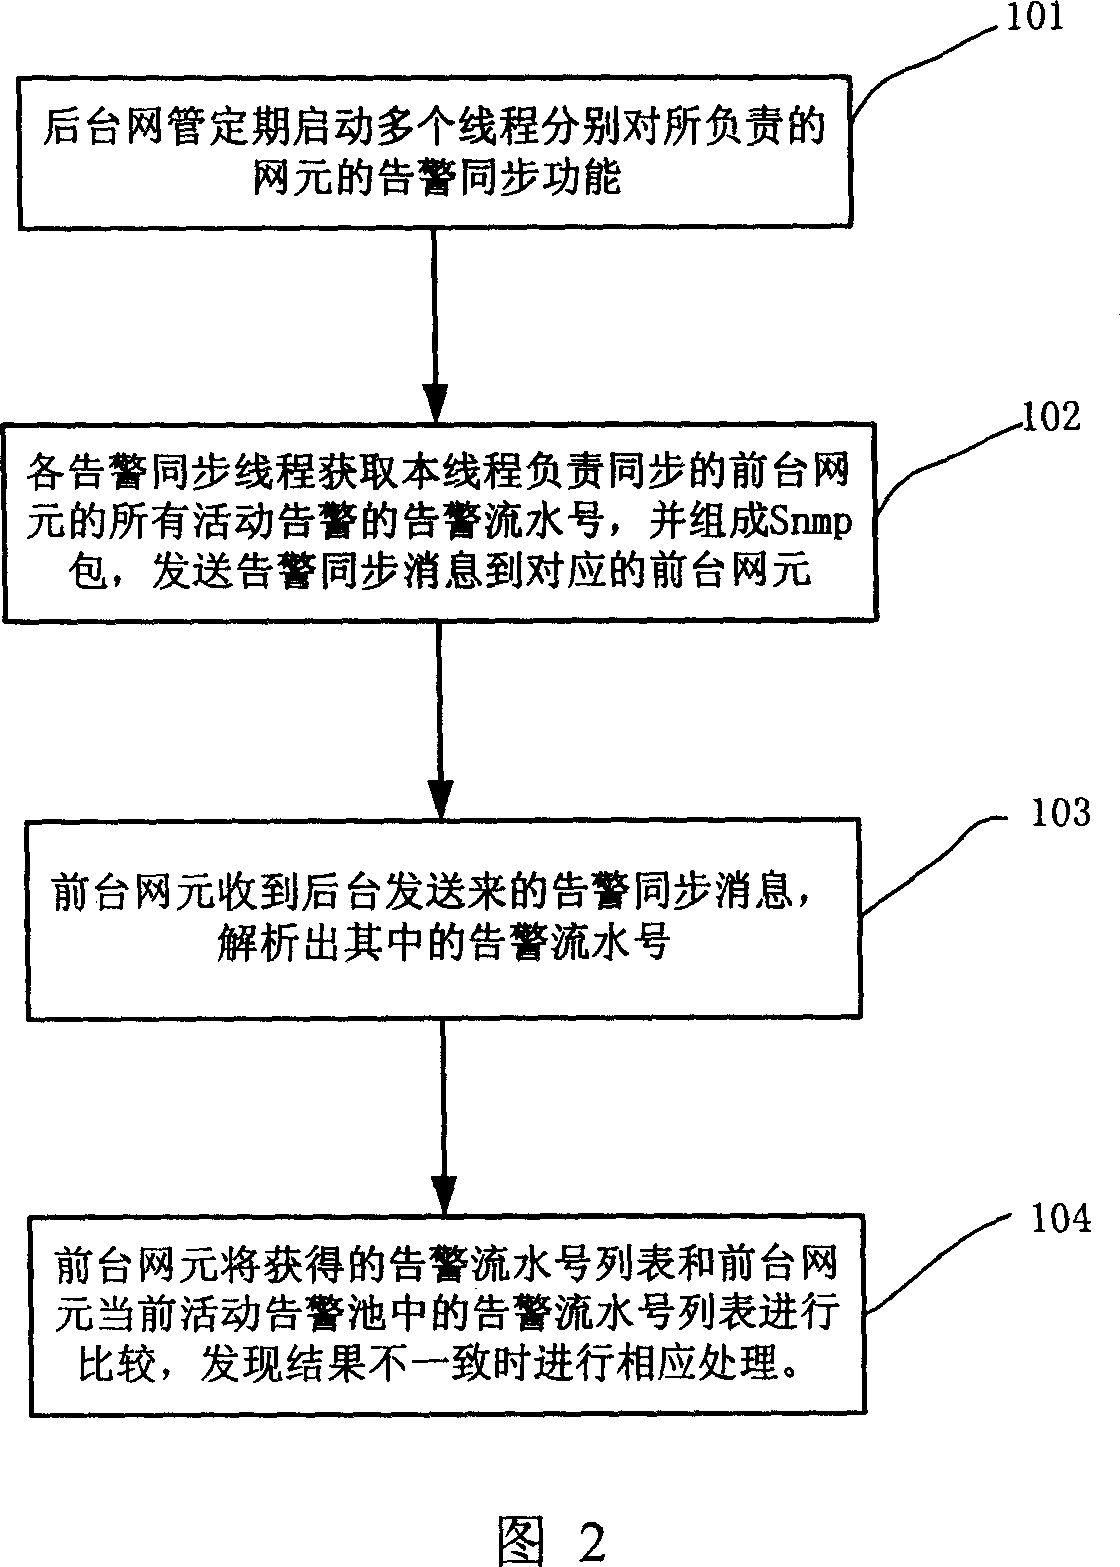 Method for synchronization of fore-and-aft alarm